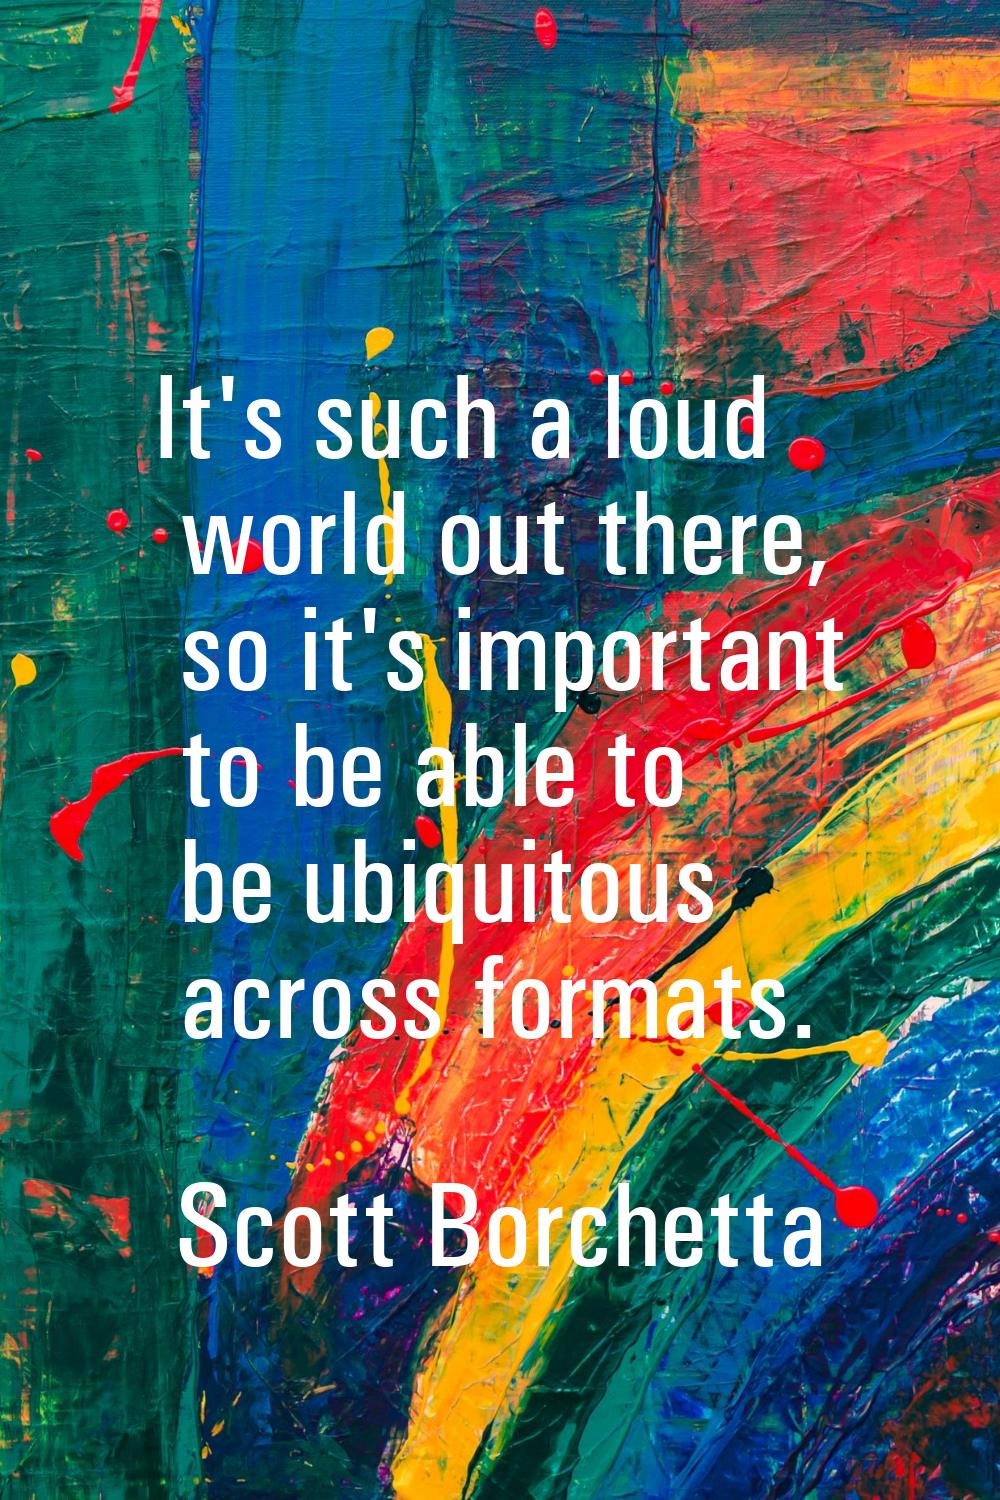 It's such a loud world out there, so it's important to be able to be ubiquitous across formats.